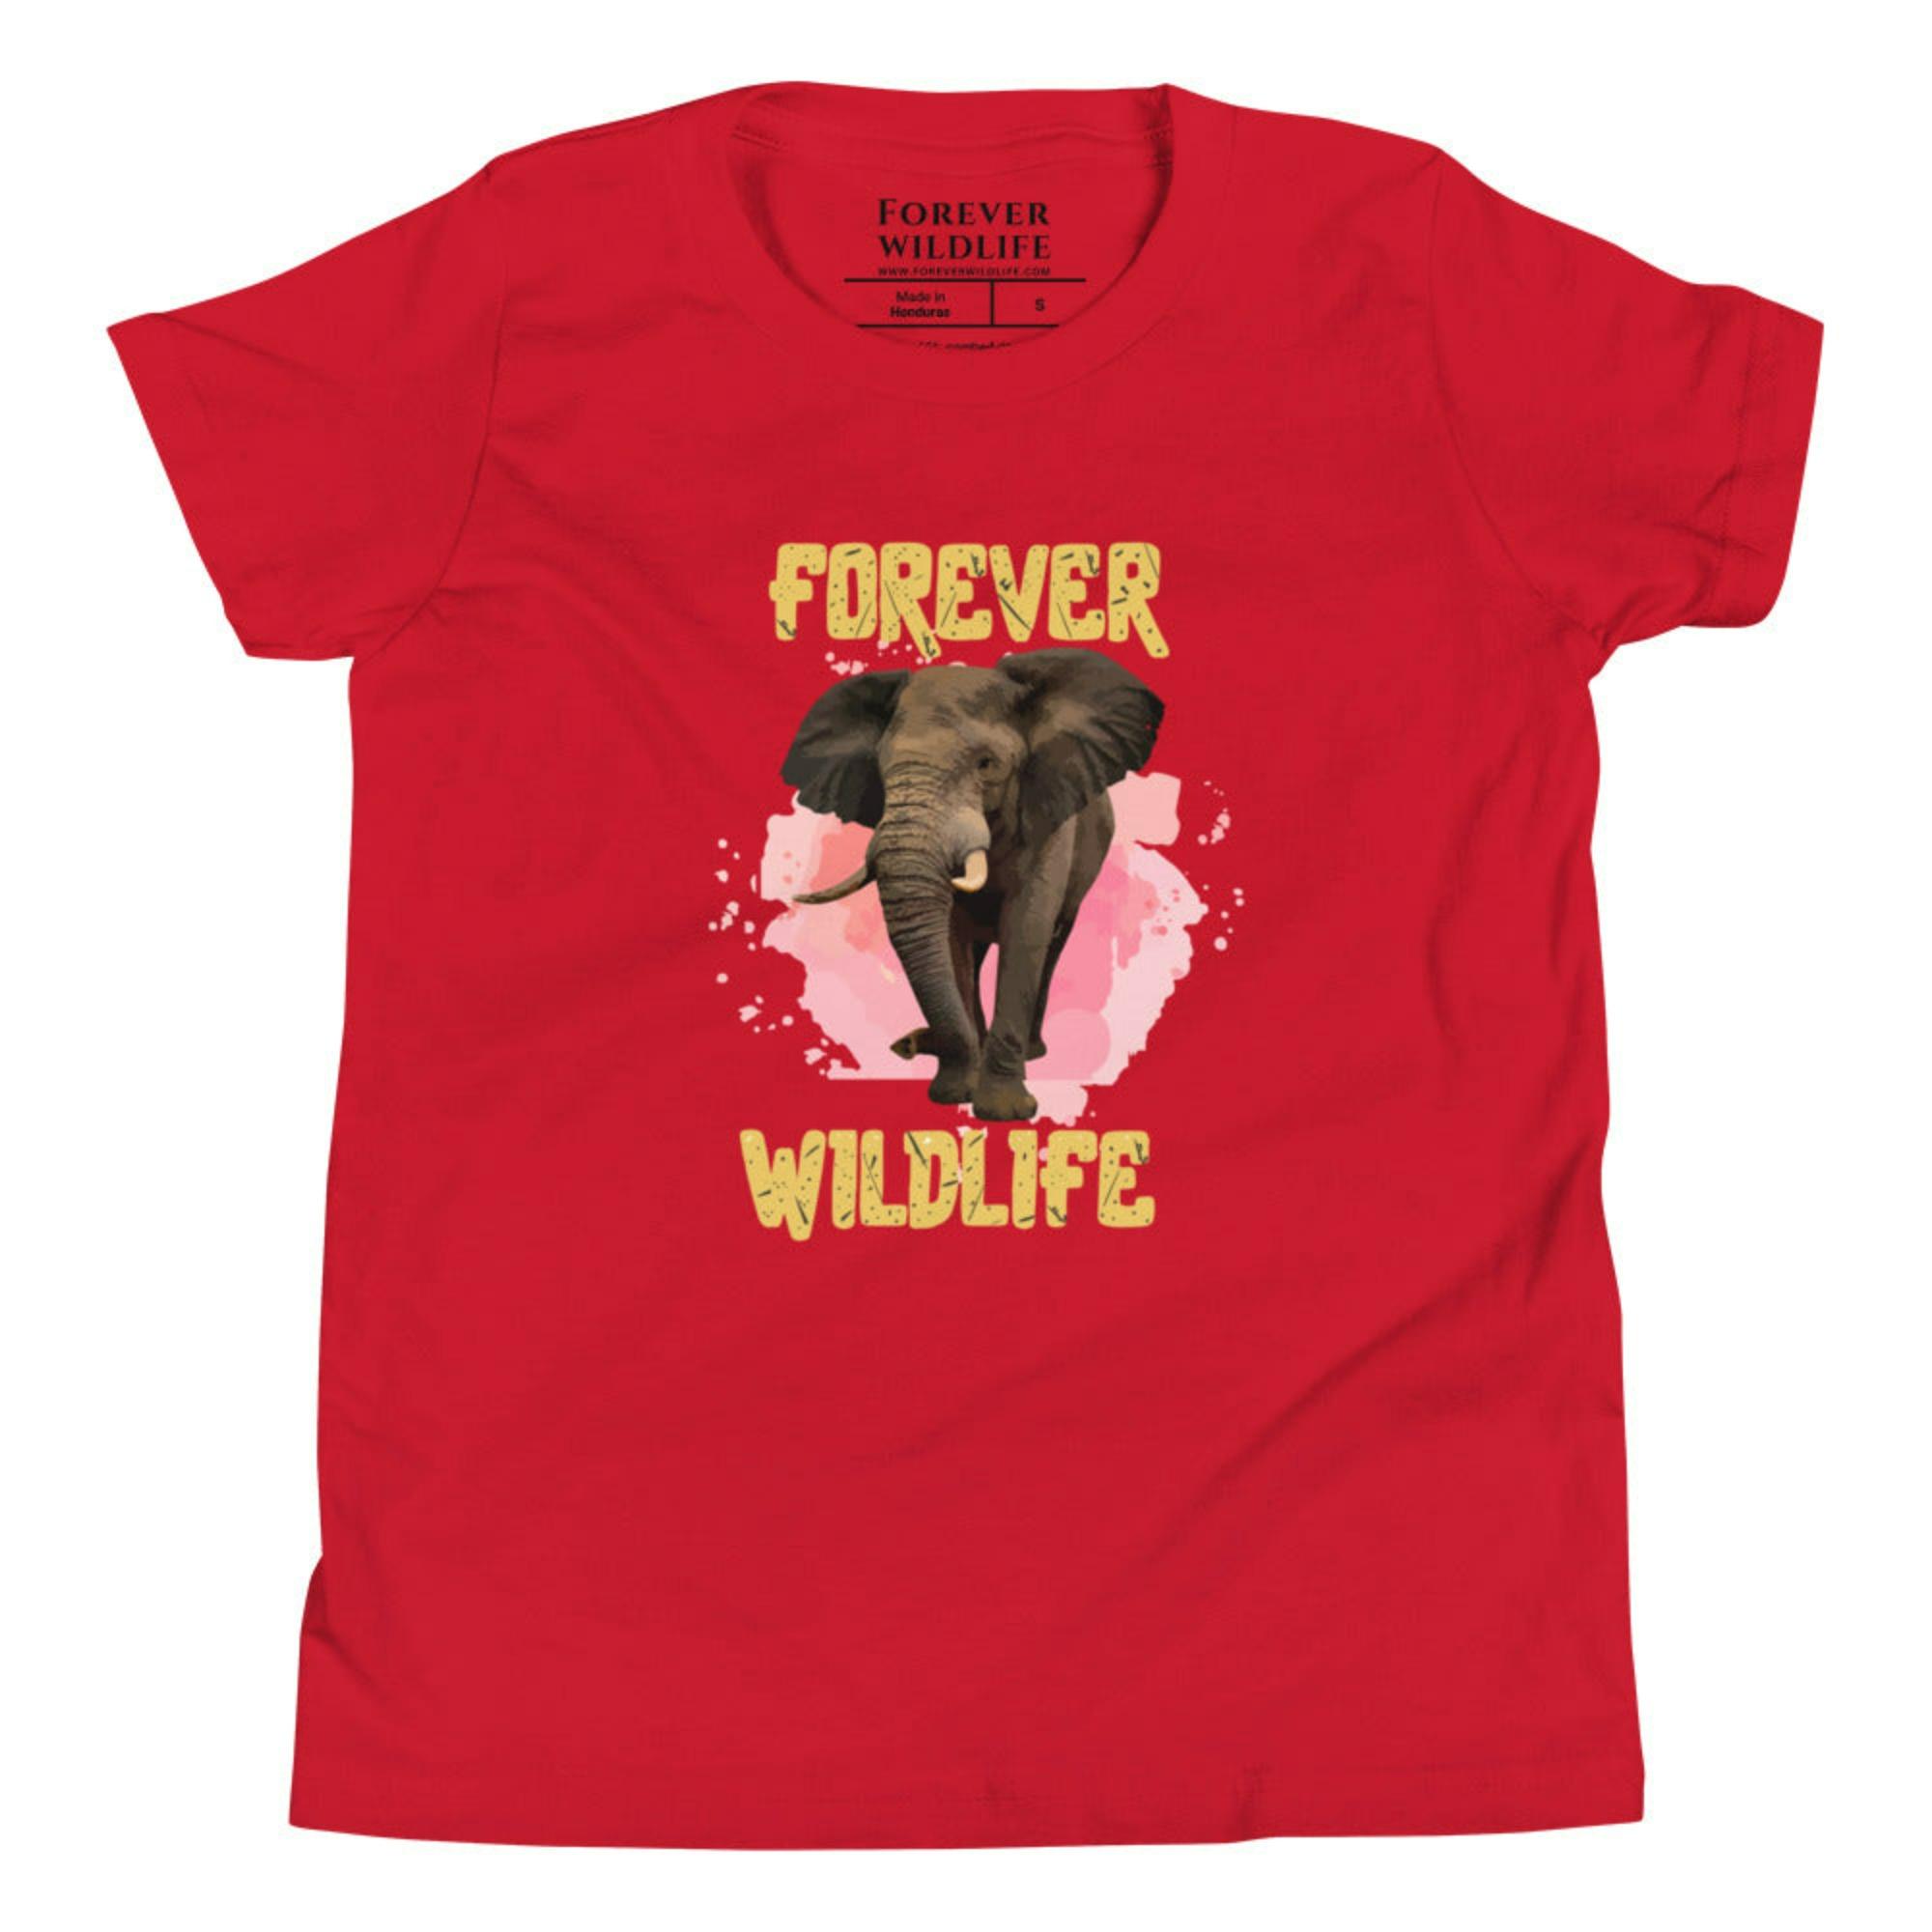 Red Youth T-Shirt with Elephant graphic as part of Wildlife T Shirts, Wildlife Clothing & Apparel by Forever Wildlife